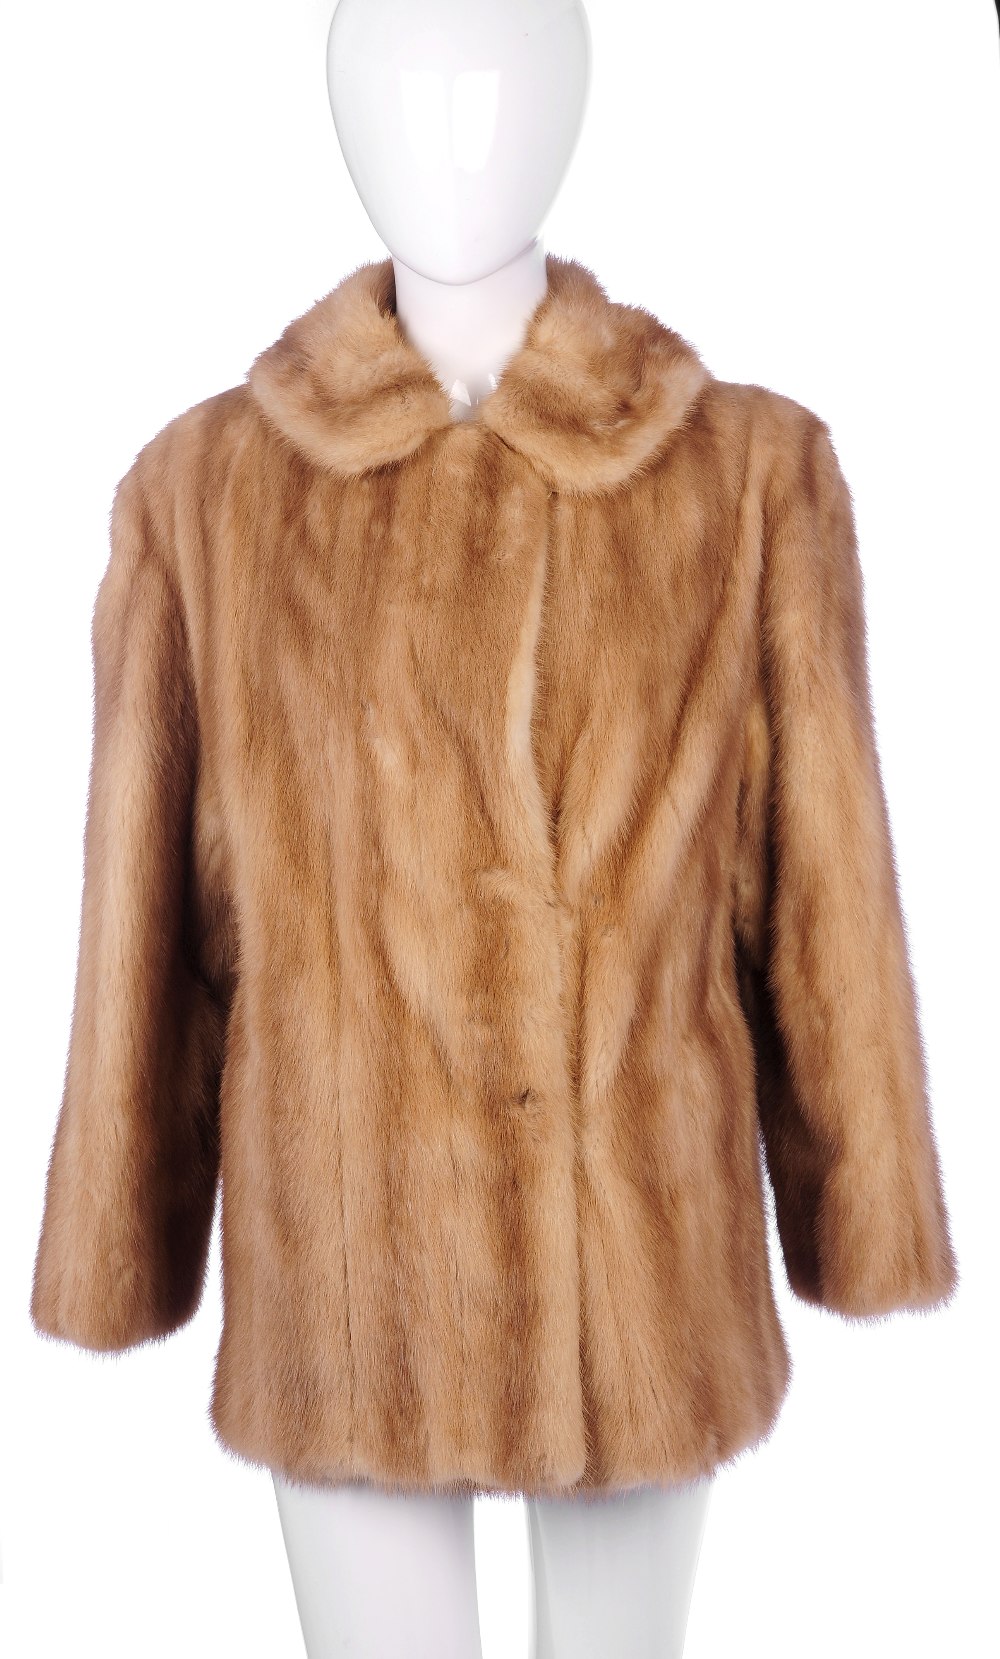 A three-quarter length pastel mink coat. Designed with a notched lapel collar, hook and eye